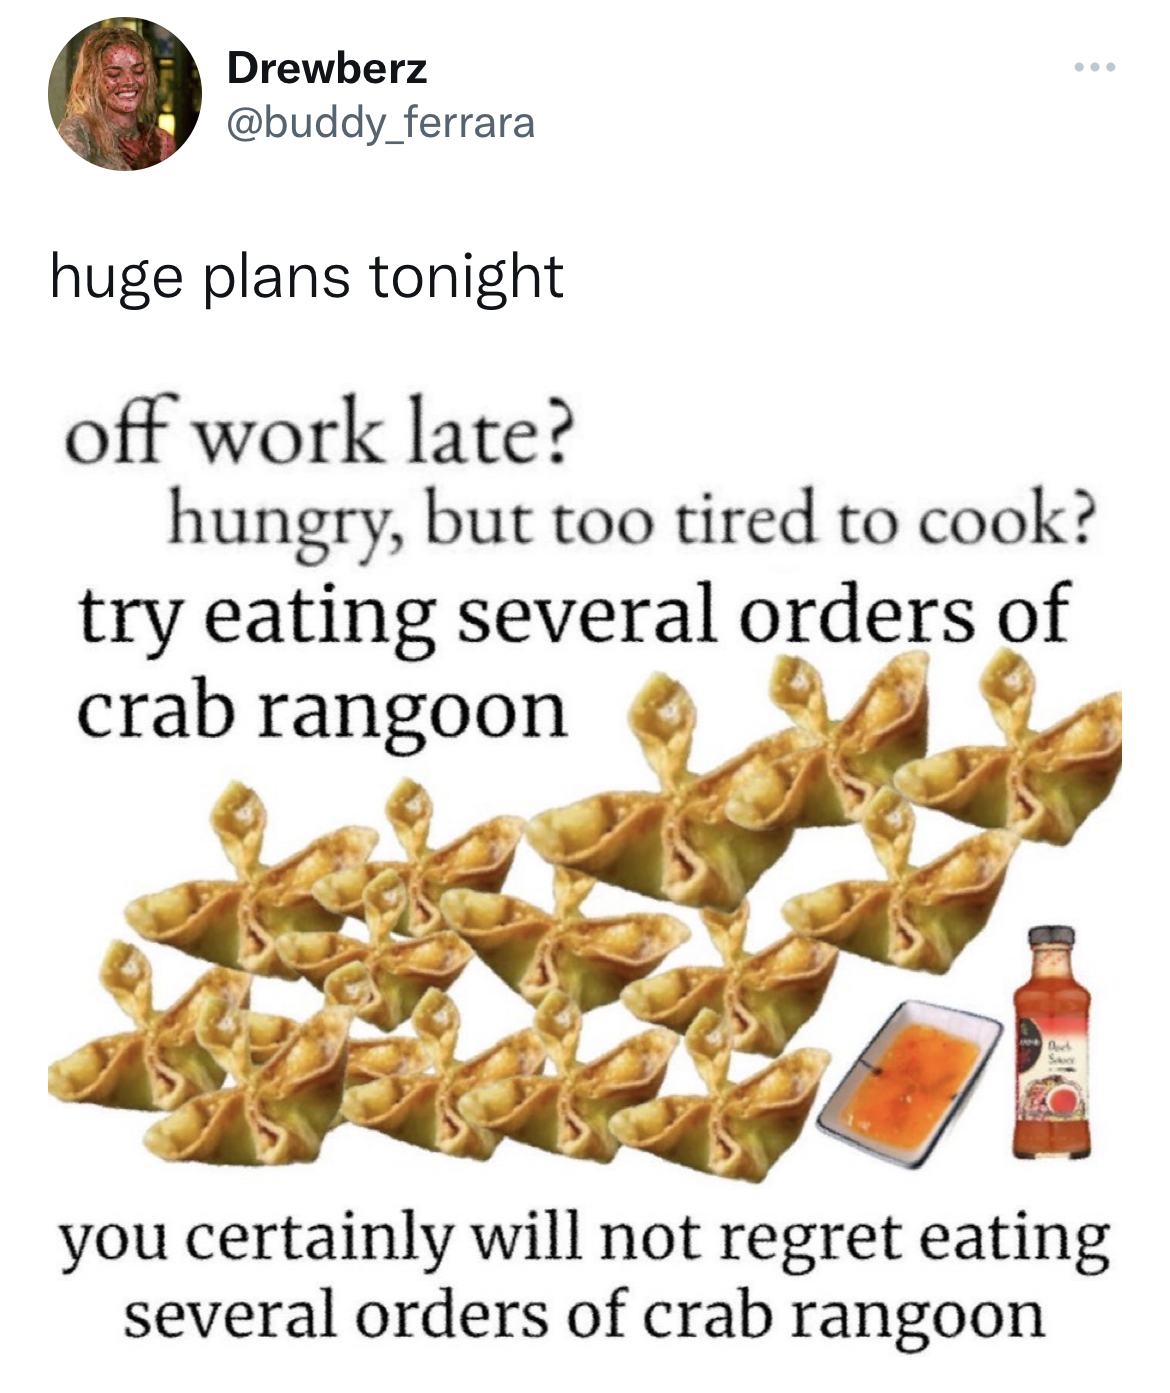 Tweets of the week - food - Drewberz huge plans tonight off work late? hungry, but too tired to cook? try eating several orders of crab rangoon you certainly will not regret eating several orders of crab rangoon